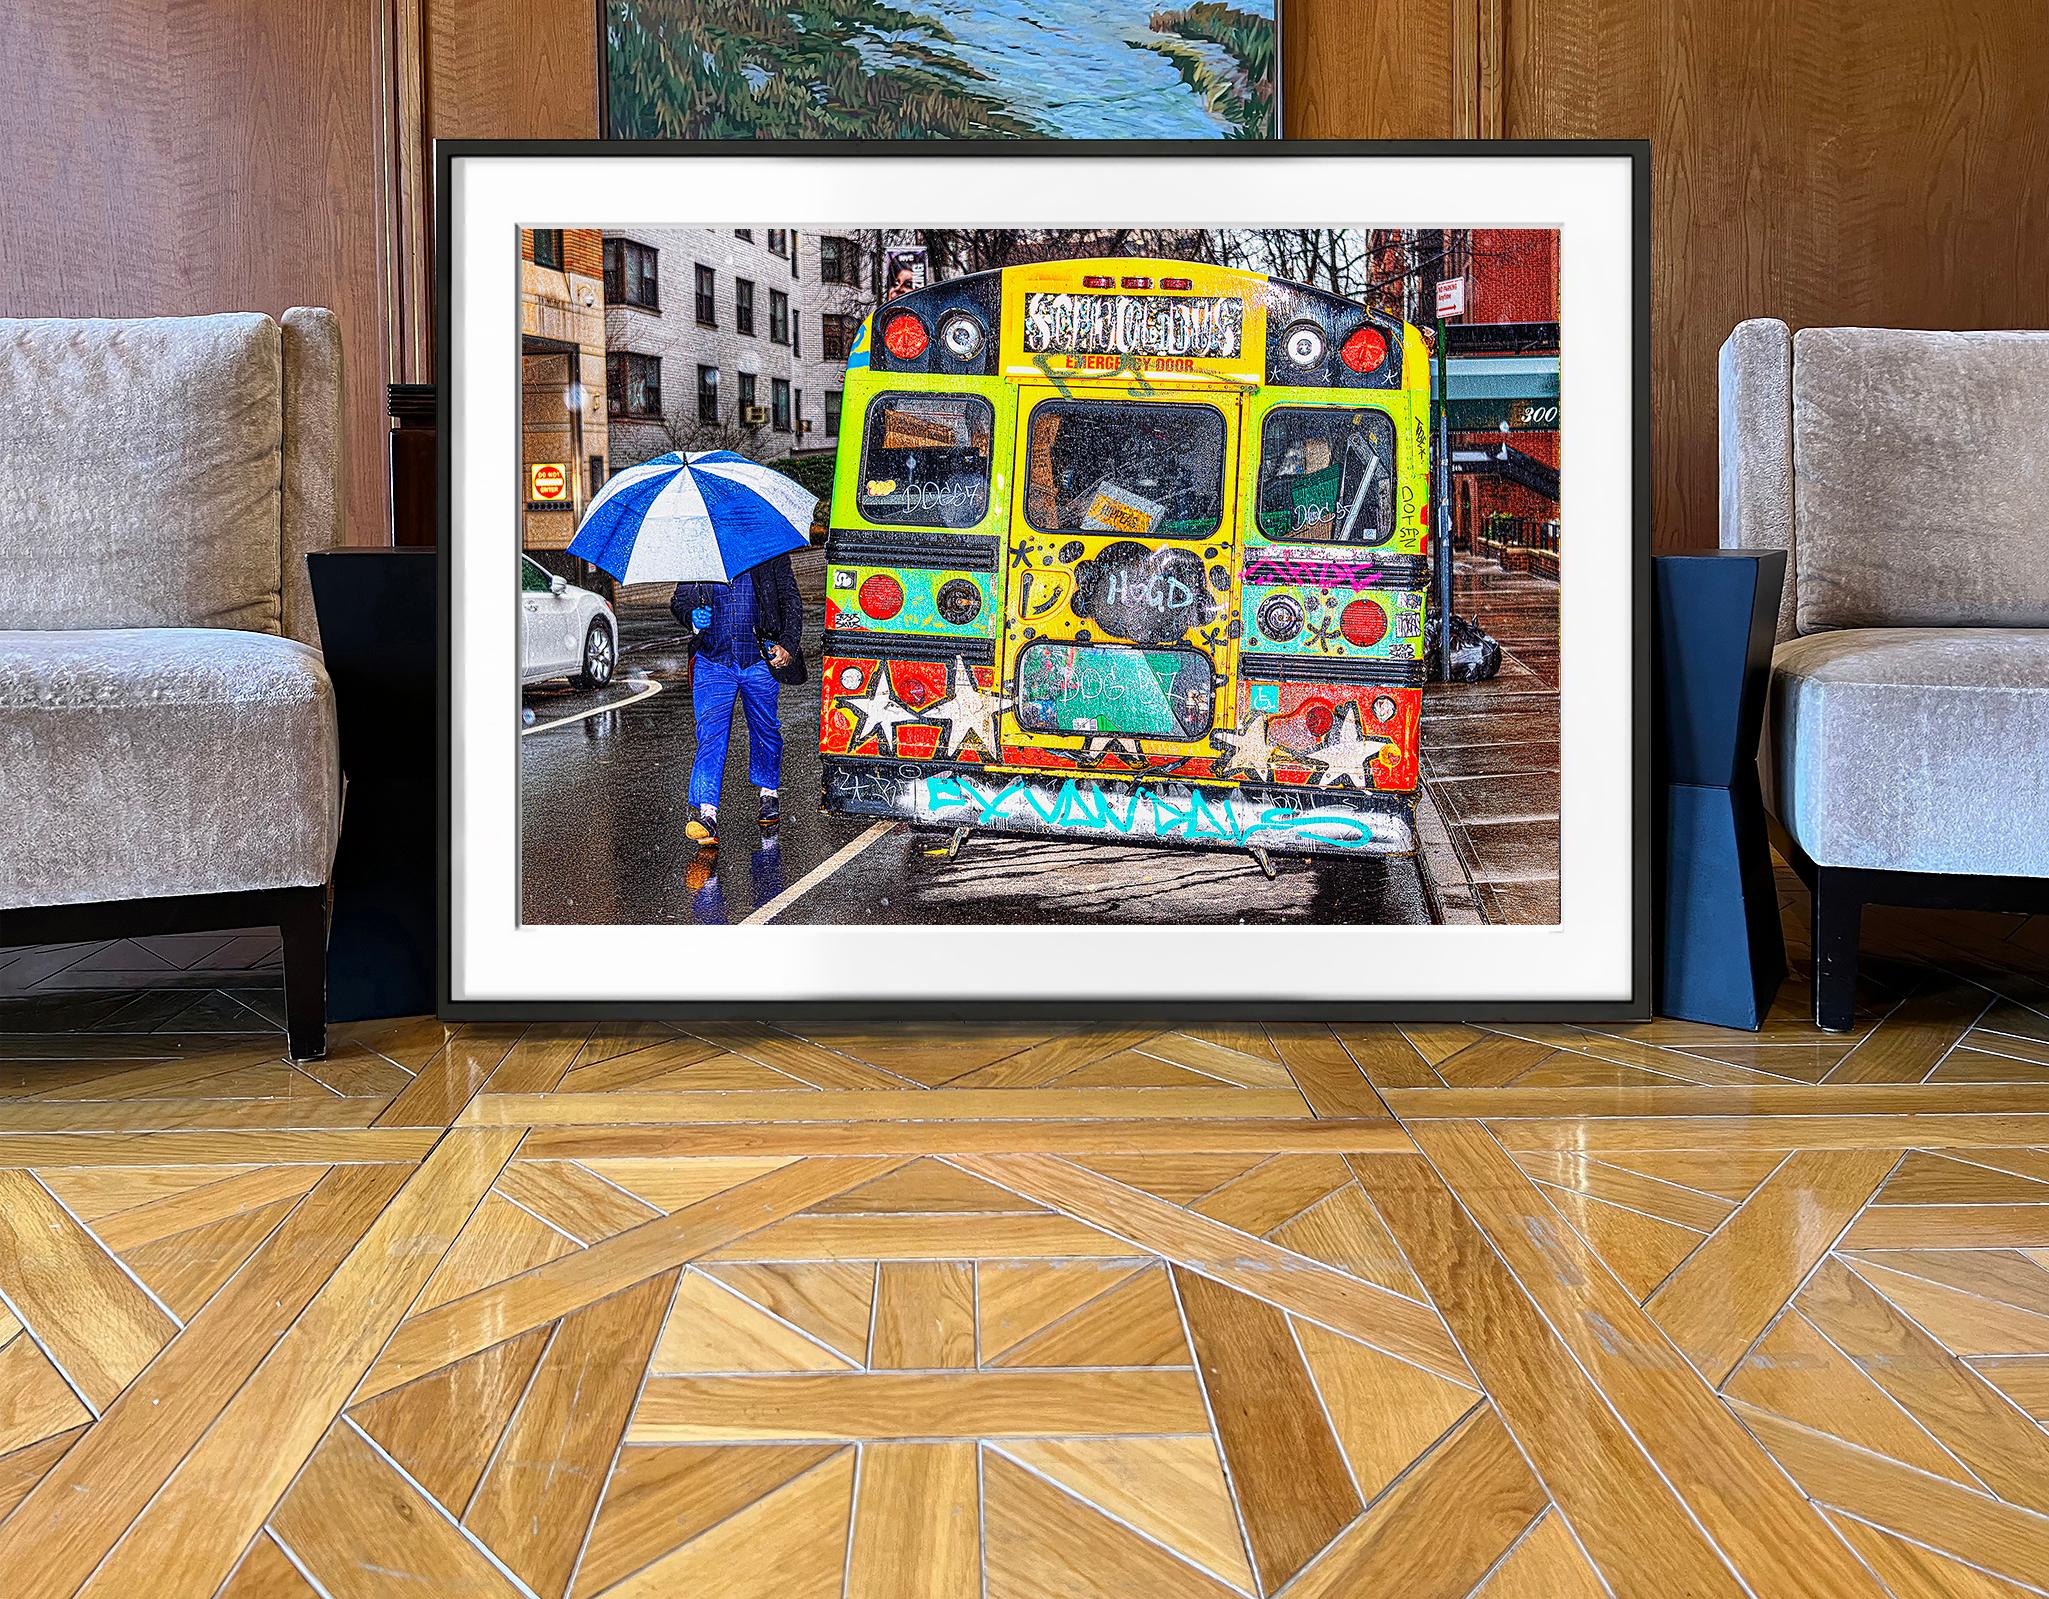 A Contrast of Two Art Styles - Graffiti Bus & Blue Umbrella on Rainy Day  - Abstract Expressionist Photograph by Mitchell Funk